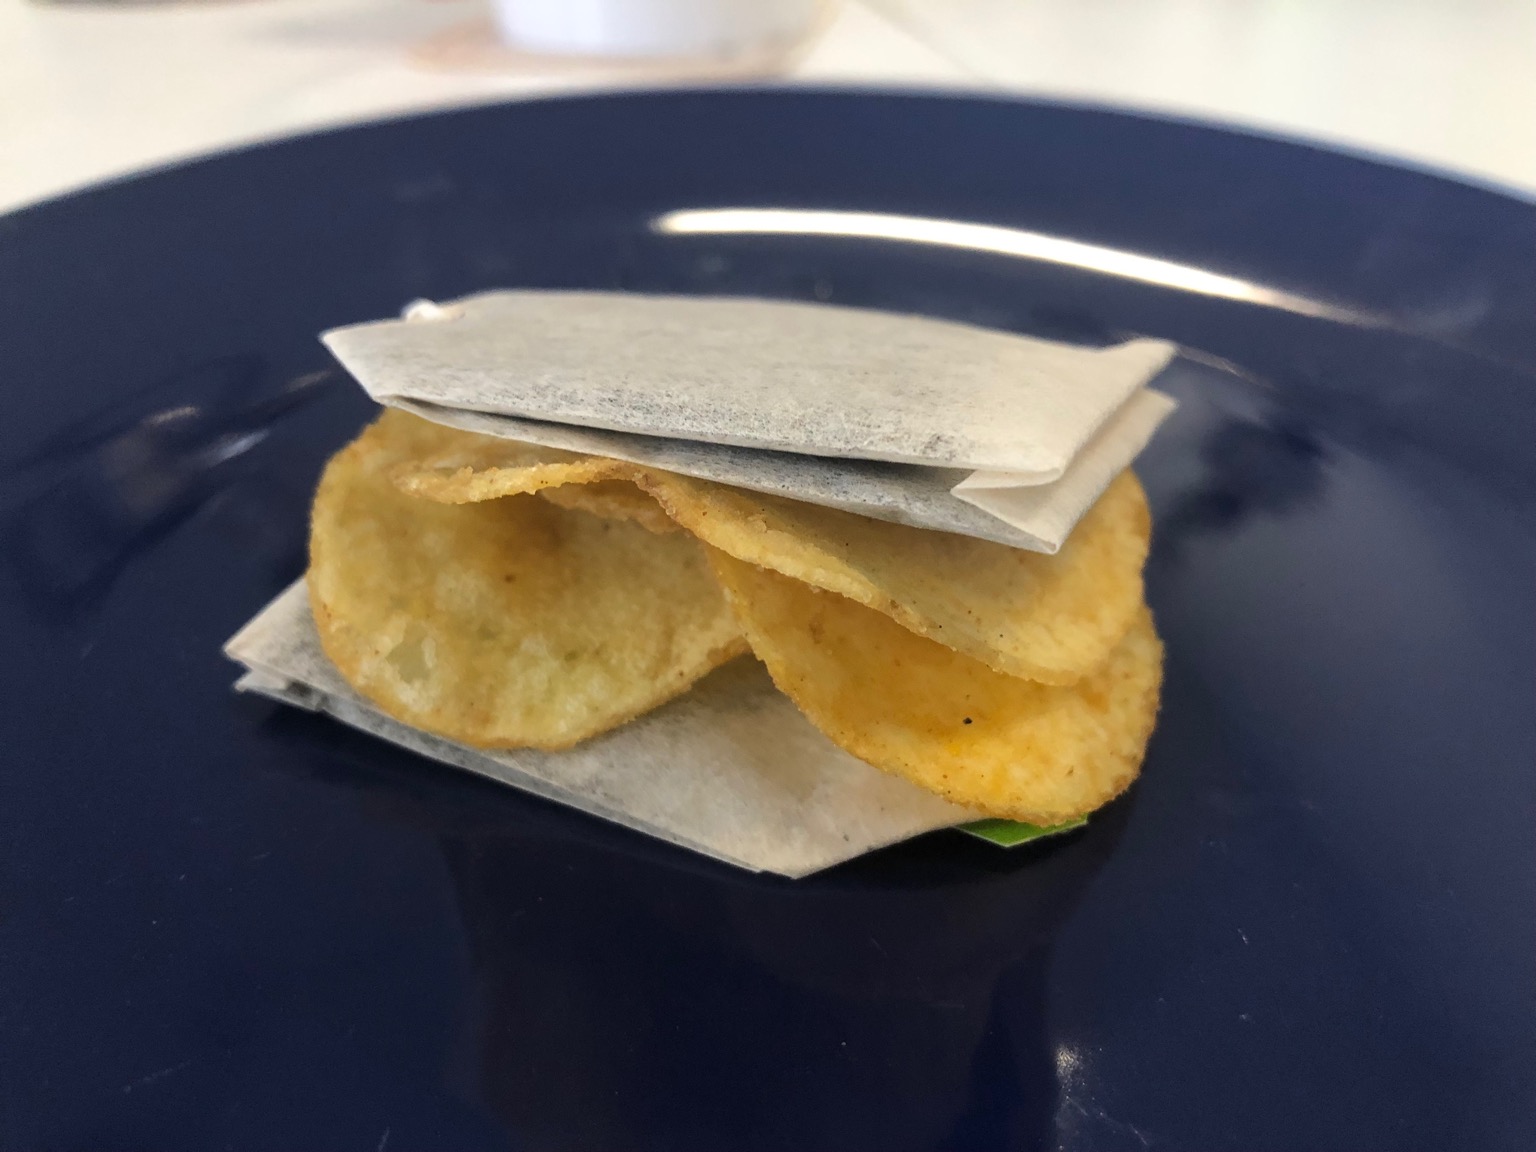 Crisps playfully sandwiched between teabags